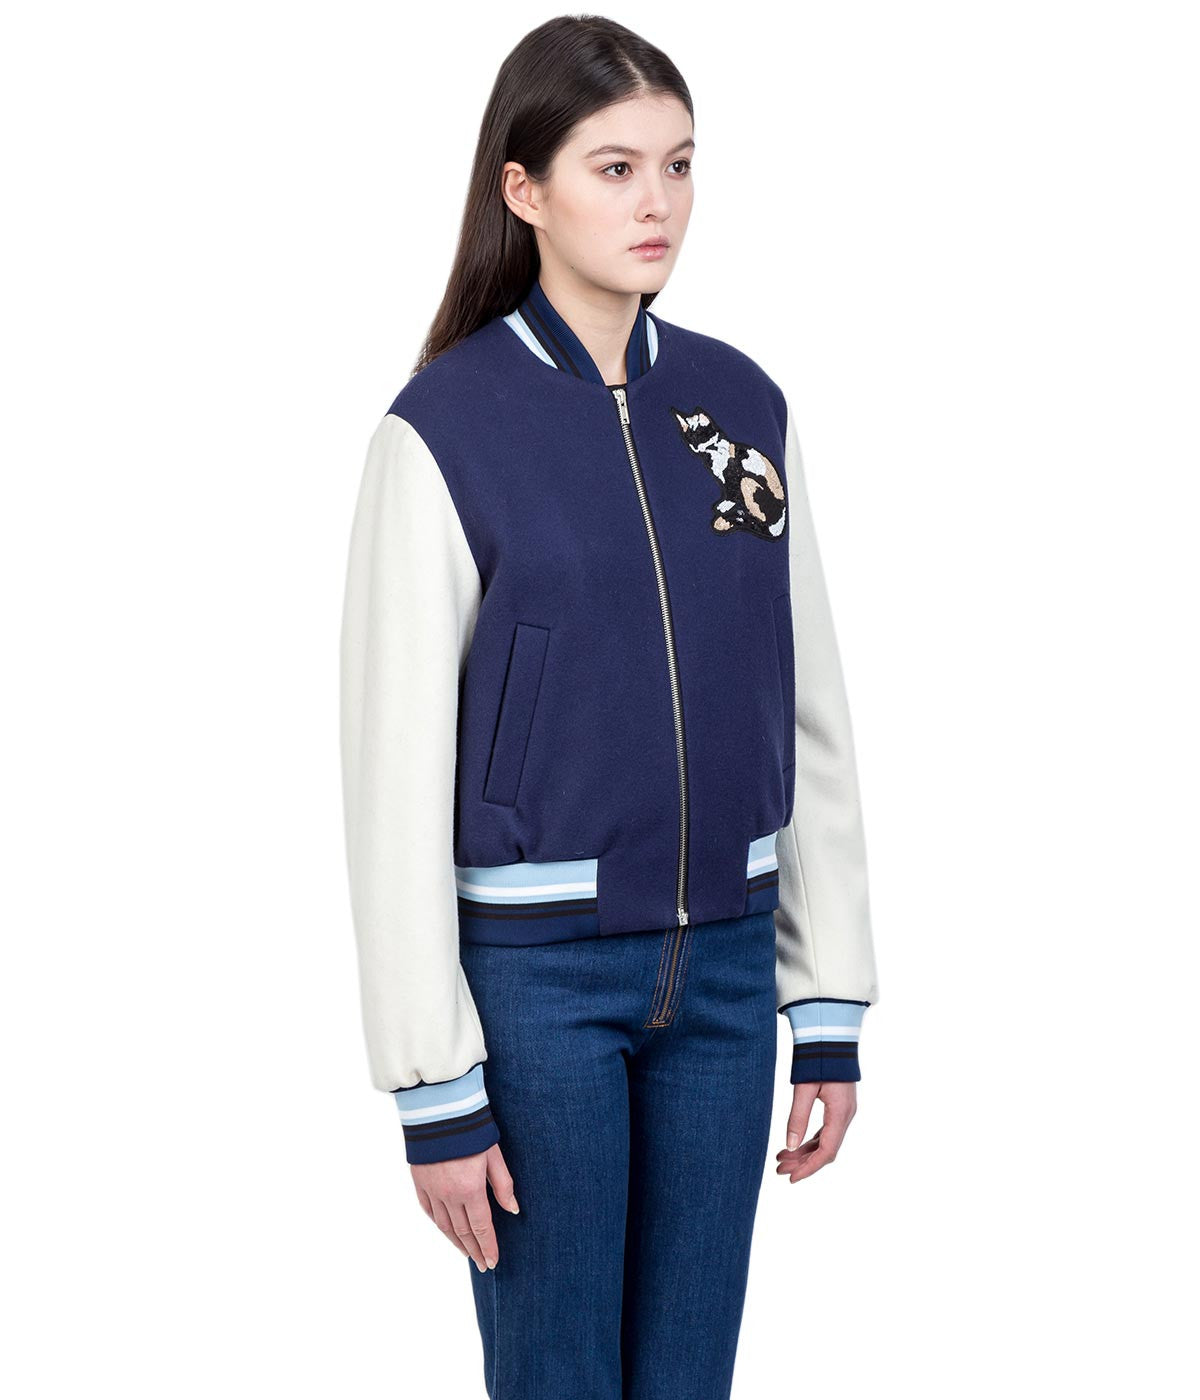 Navy Cat Appliqué Bomber Jacket (Sold out)